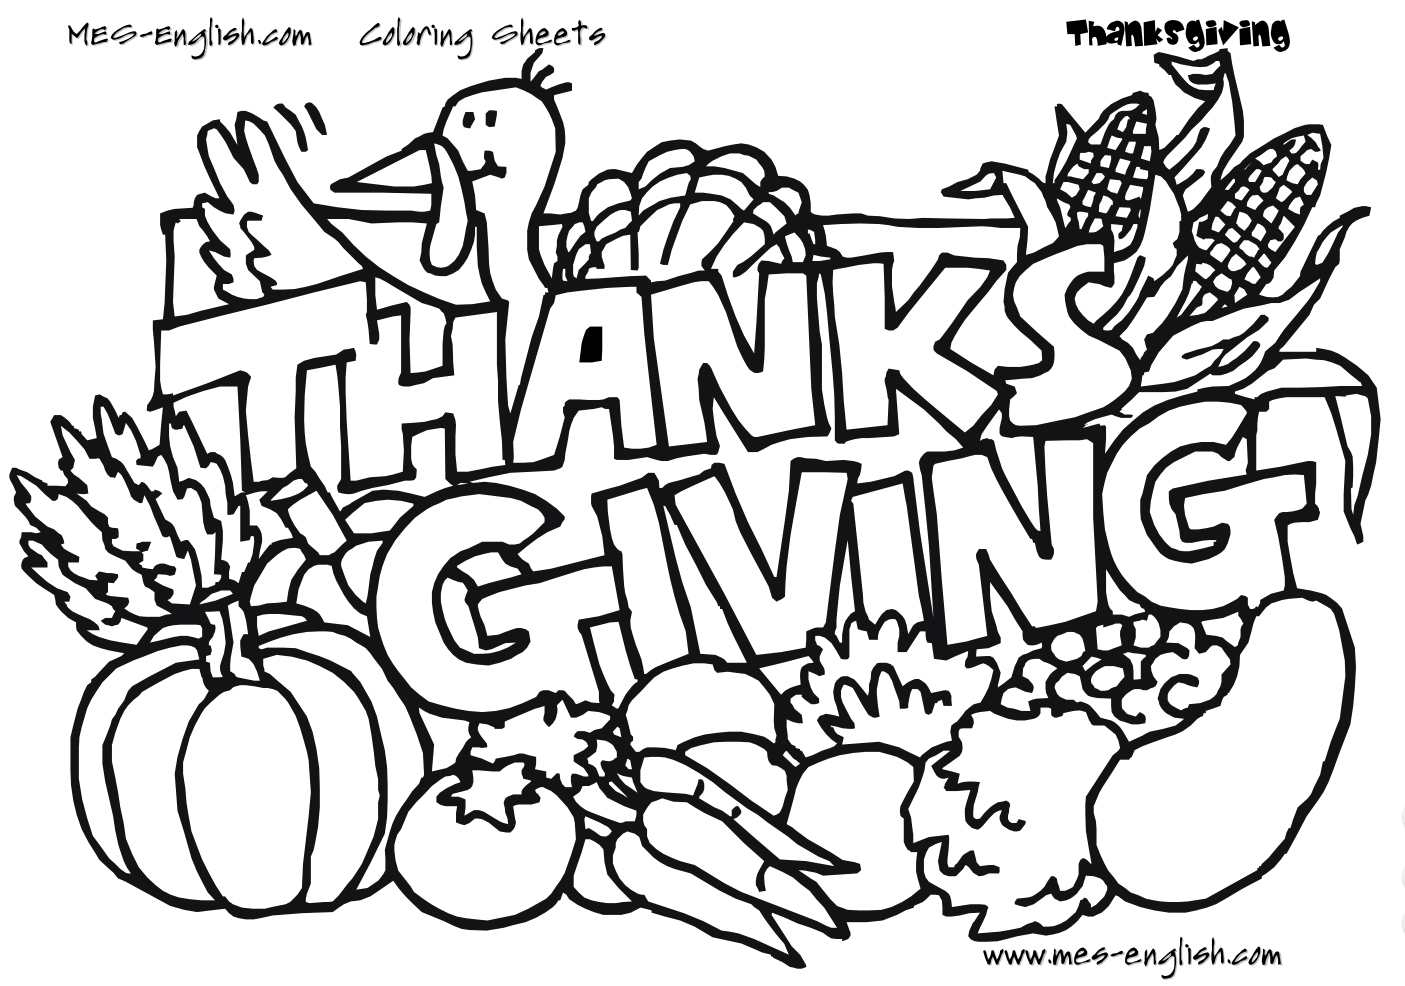 Free Thanksgiving Coloring Pages For Kids - Free Printable | Free Printable Thanksgiving Coloring Pages Worksheets